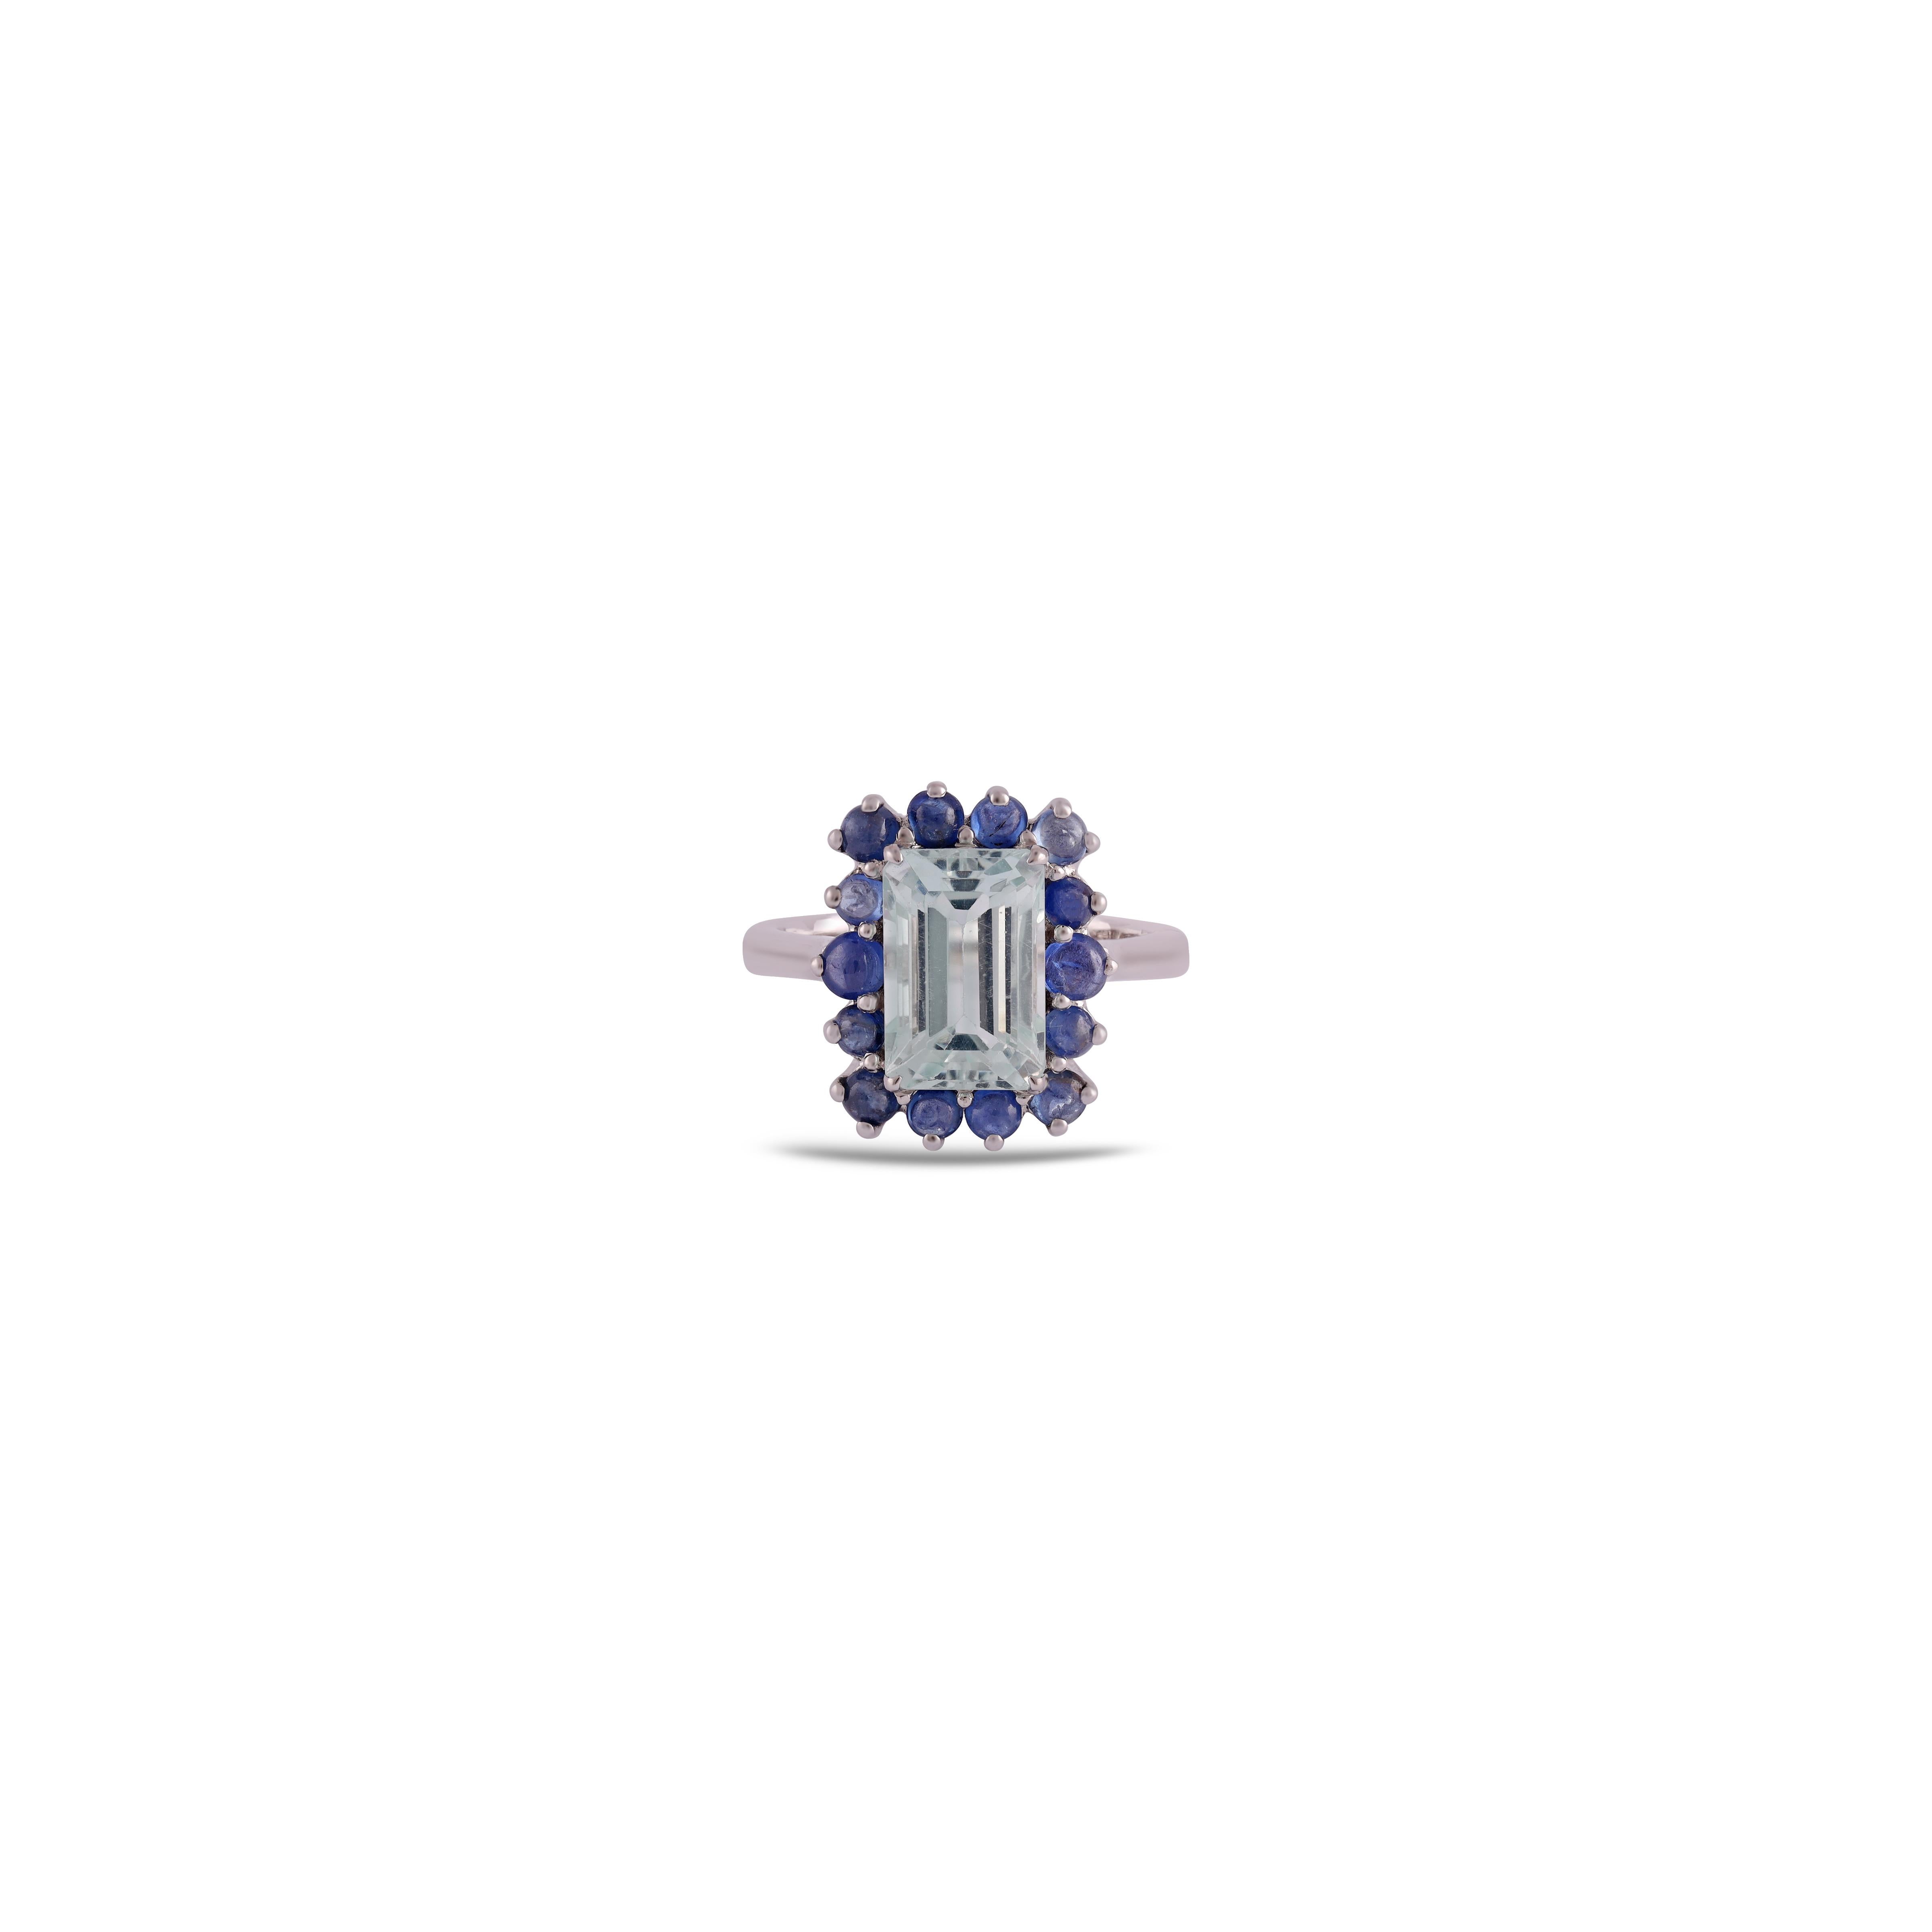 This is an elegant Aquamarine & Sapphire  ring studded in 18k White gold features a fine quality of  Aquamarine 3.35 carats with Sapphire 0.97 carats.
This entire ring is made in 18k White gold
 It is a classic ring.  
Custom Services
Resizing is